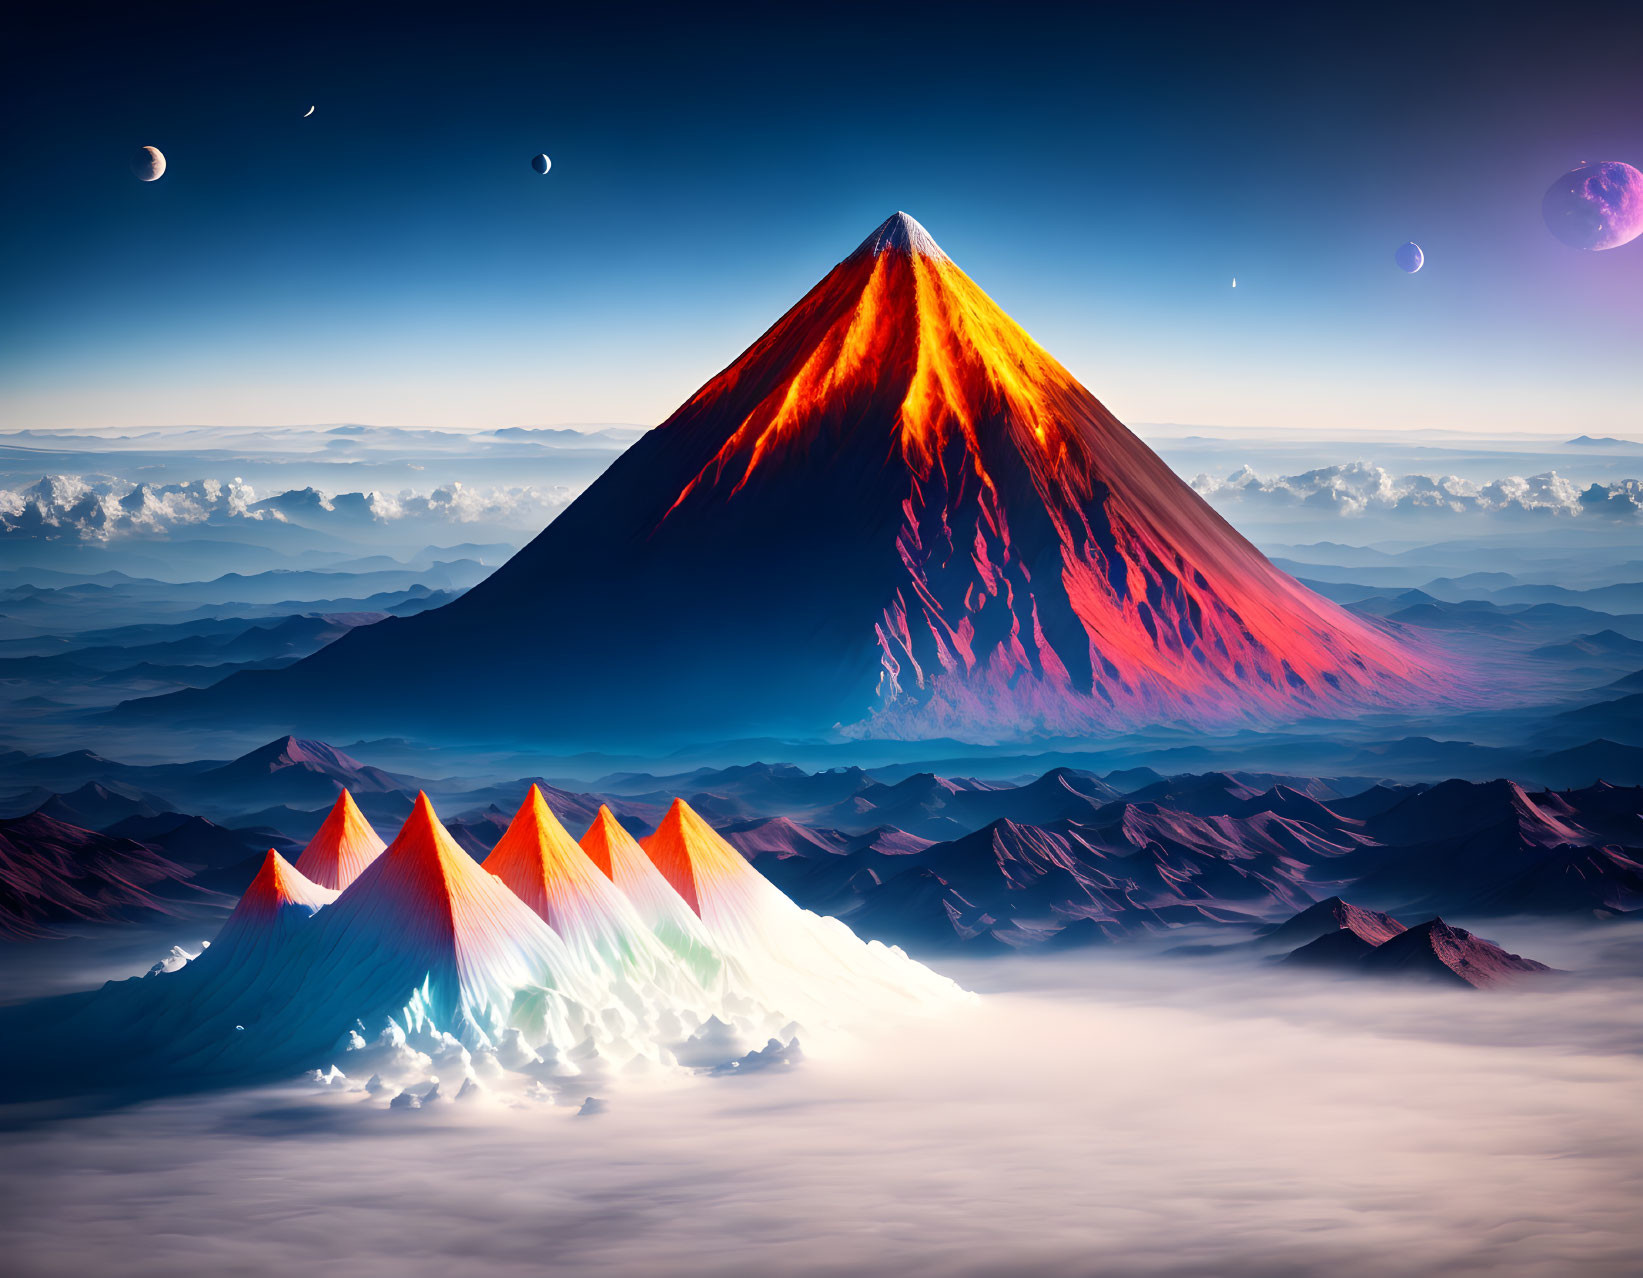 Colorful digital artwork: fiery volcano, volcanic cones, misty mountains, multiple moons and planets